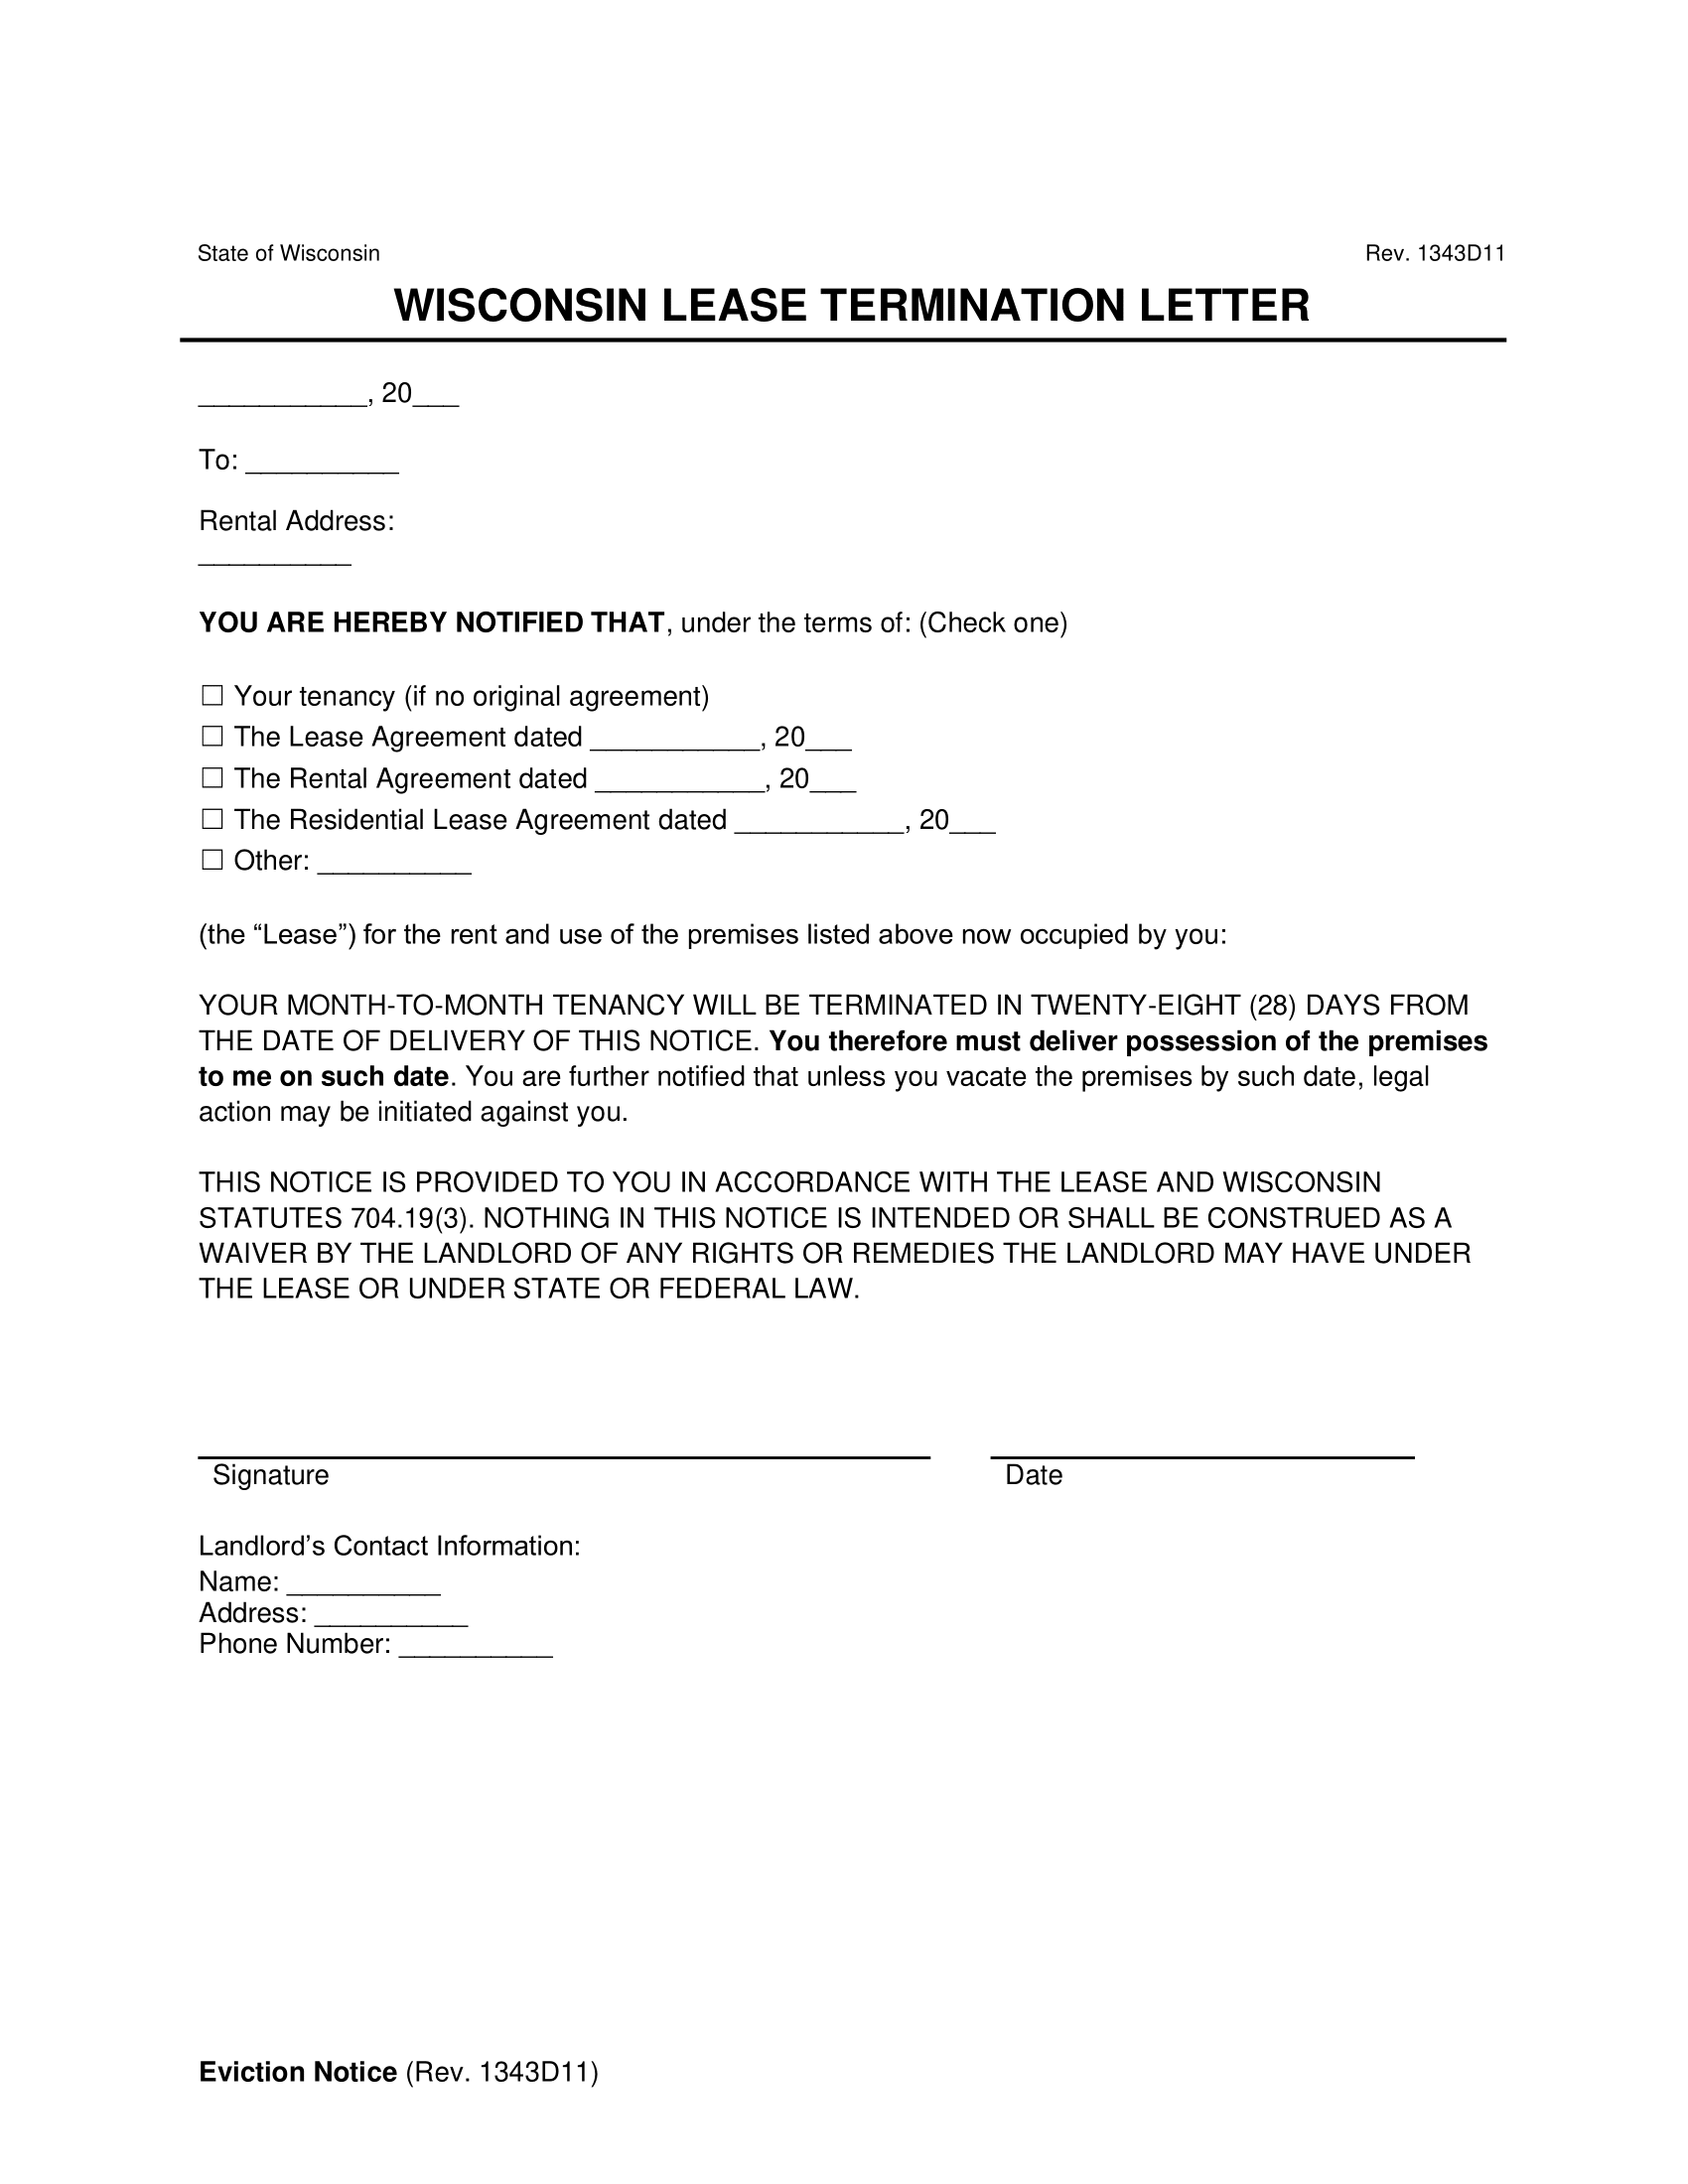 Wisconsin Lease Termination Letter Template